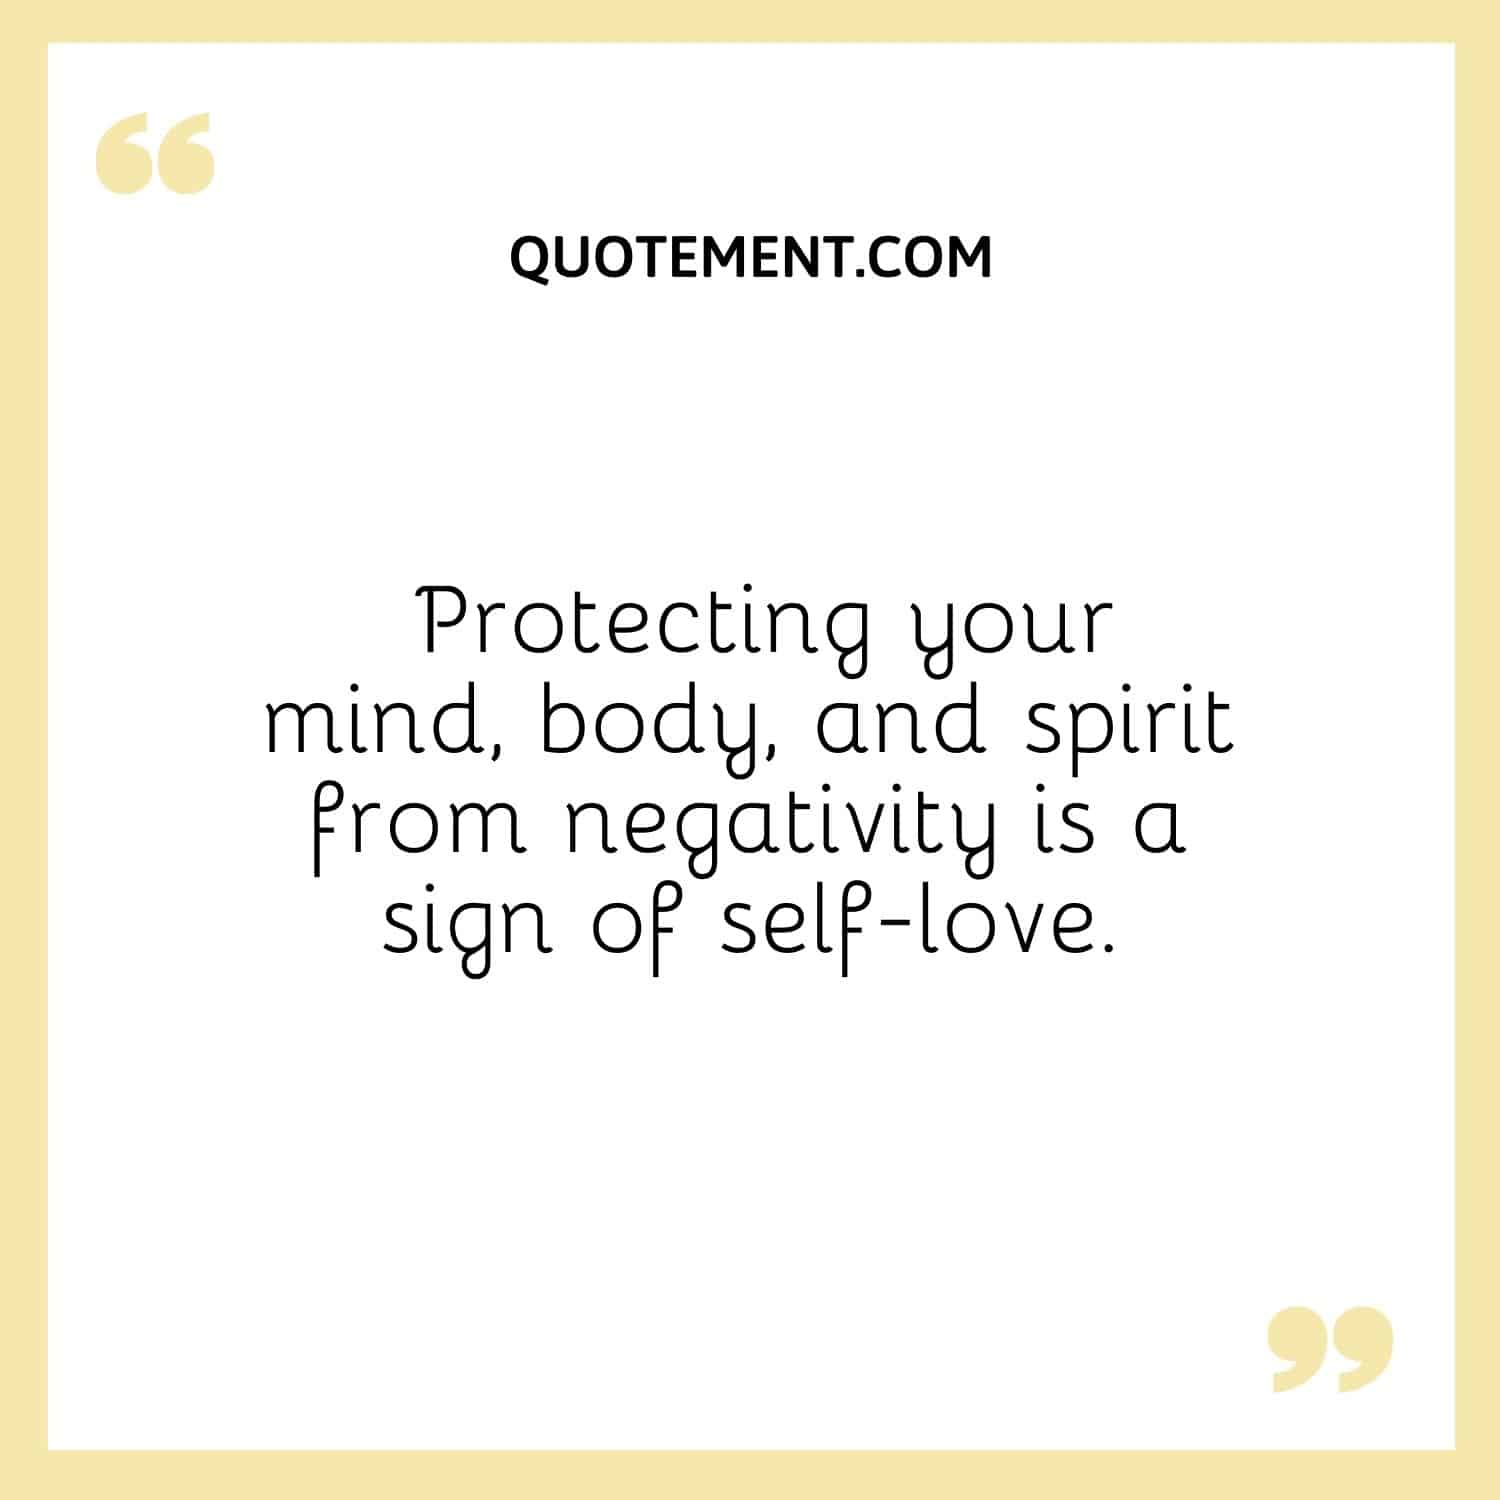 Protecting your mind, body, and spirit from negativity is a sign of self-love